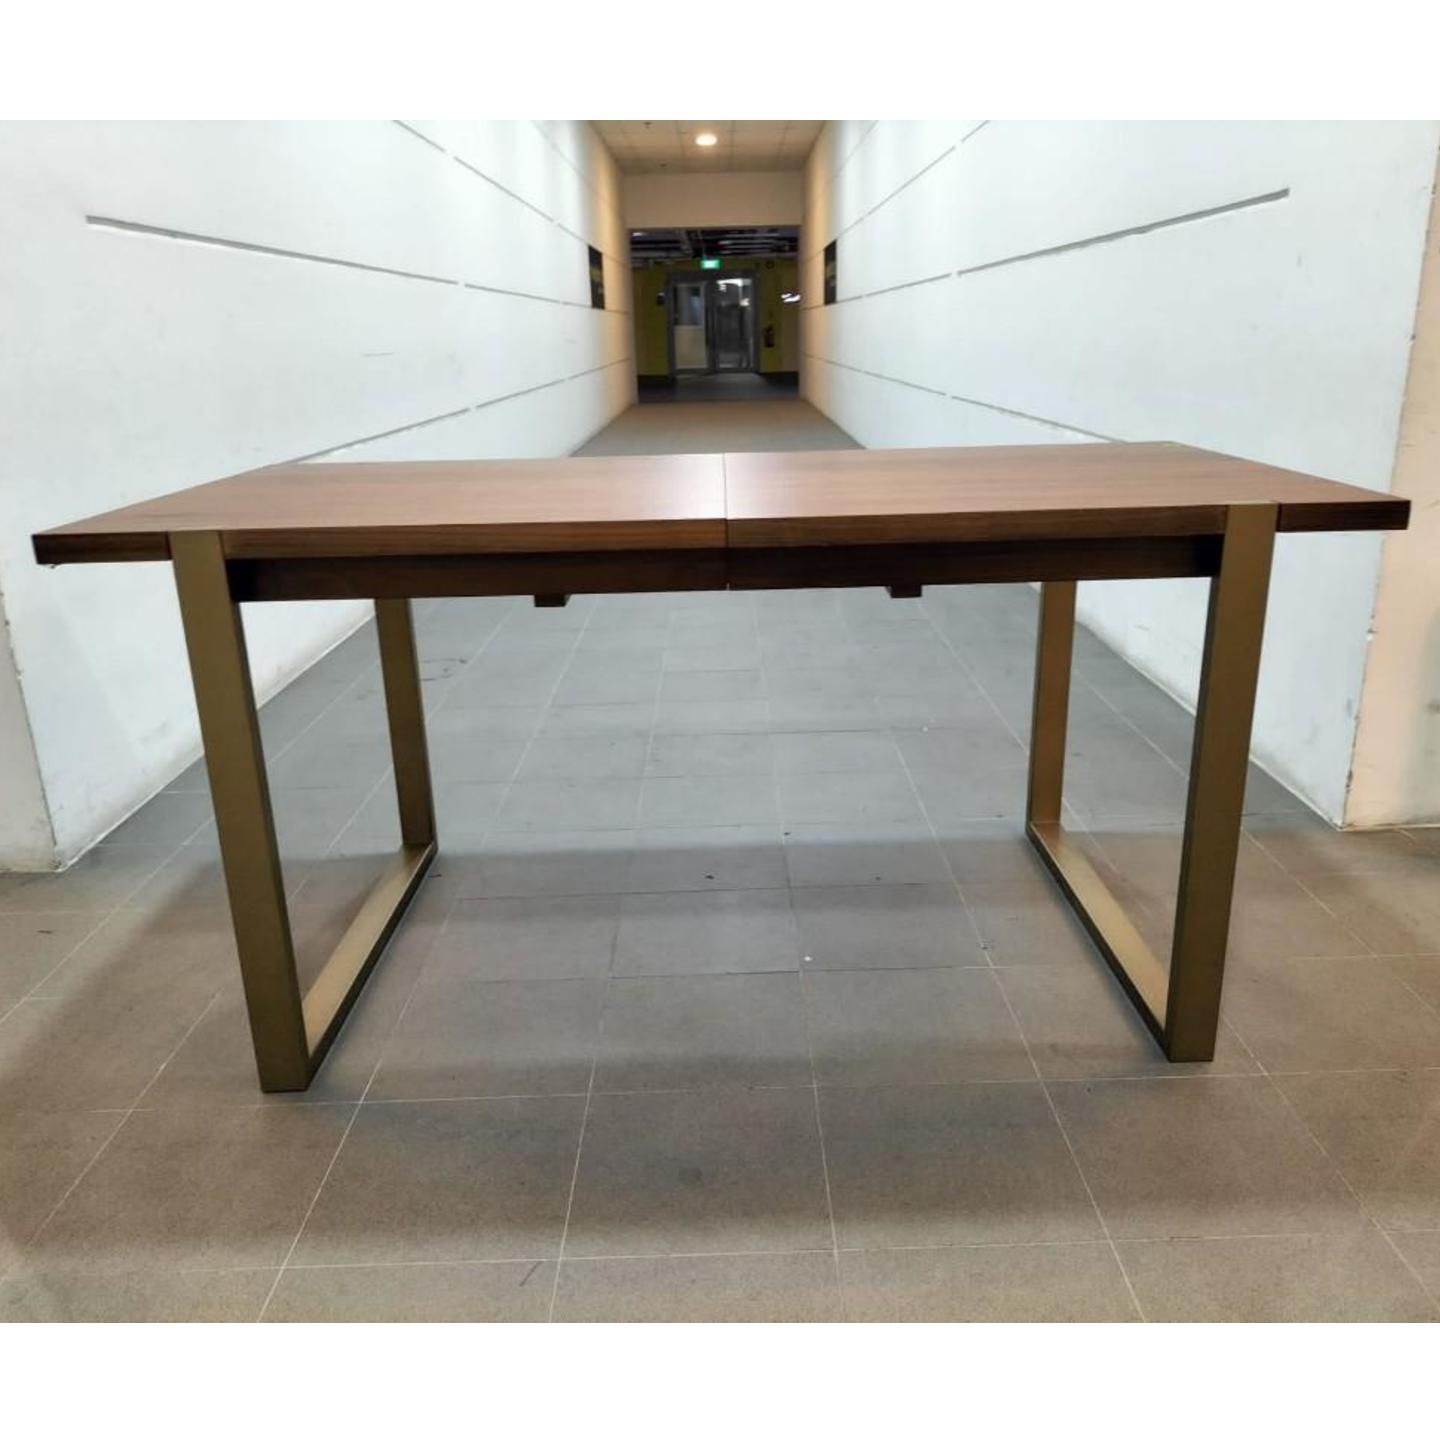 LERGEN Extendable Dining Table in WALNUT